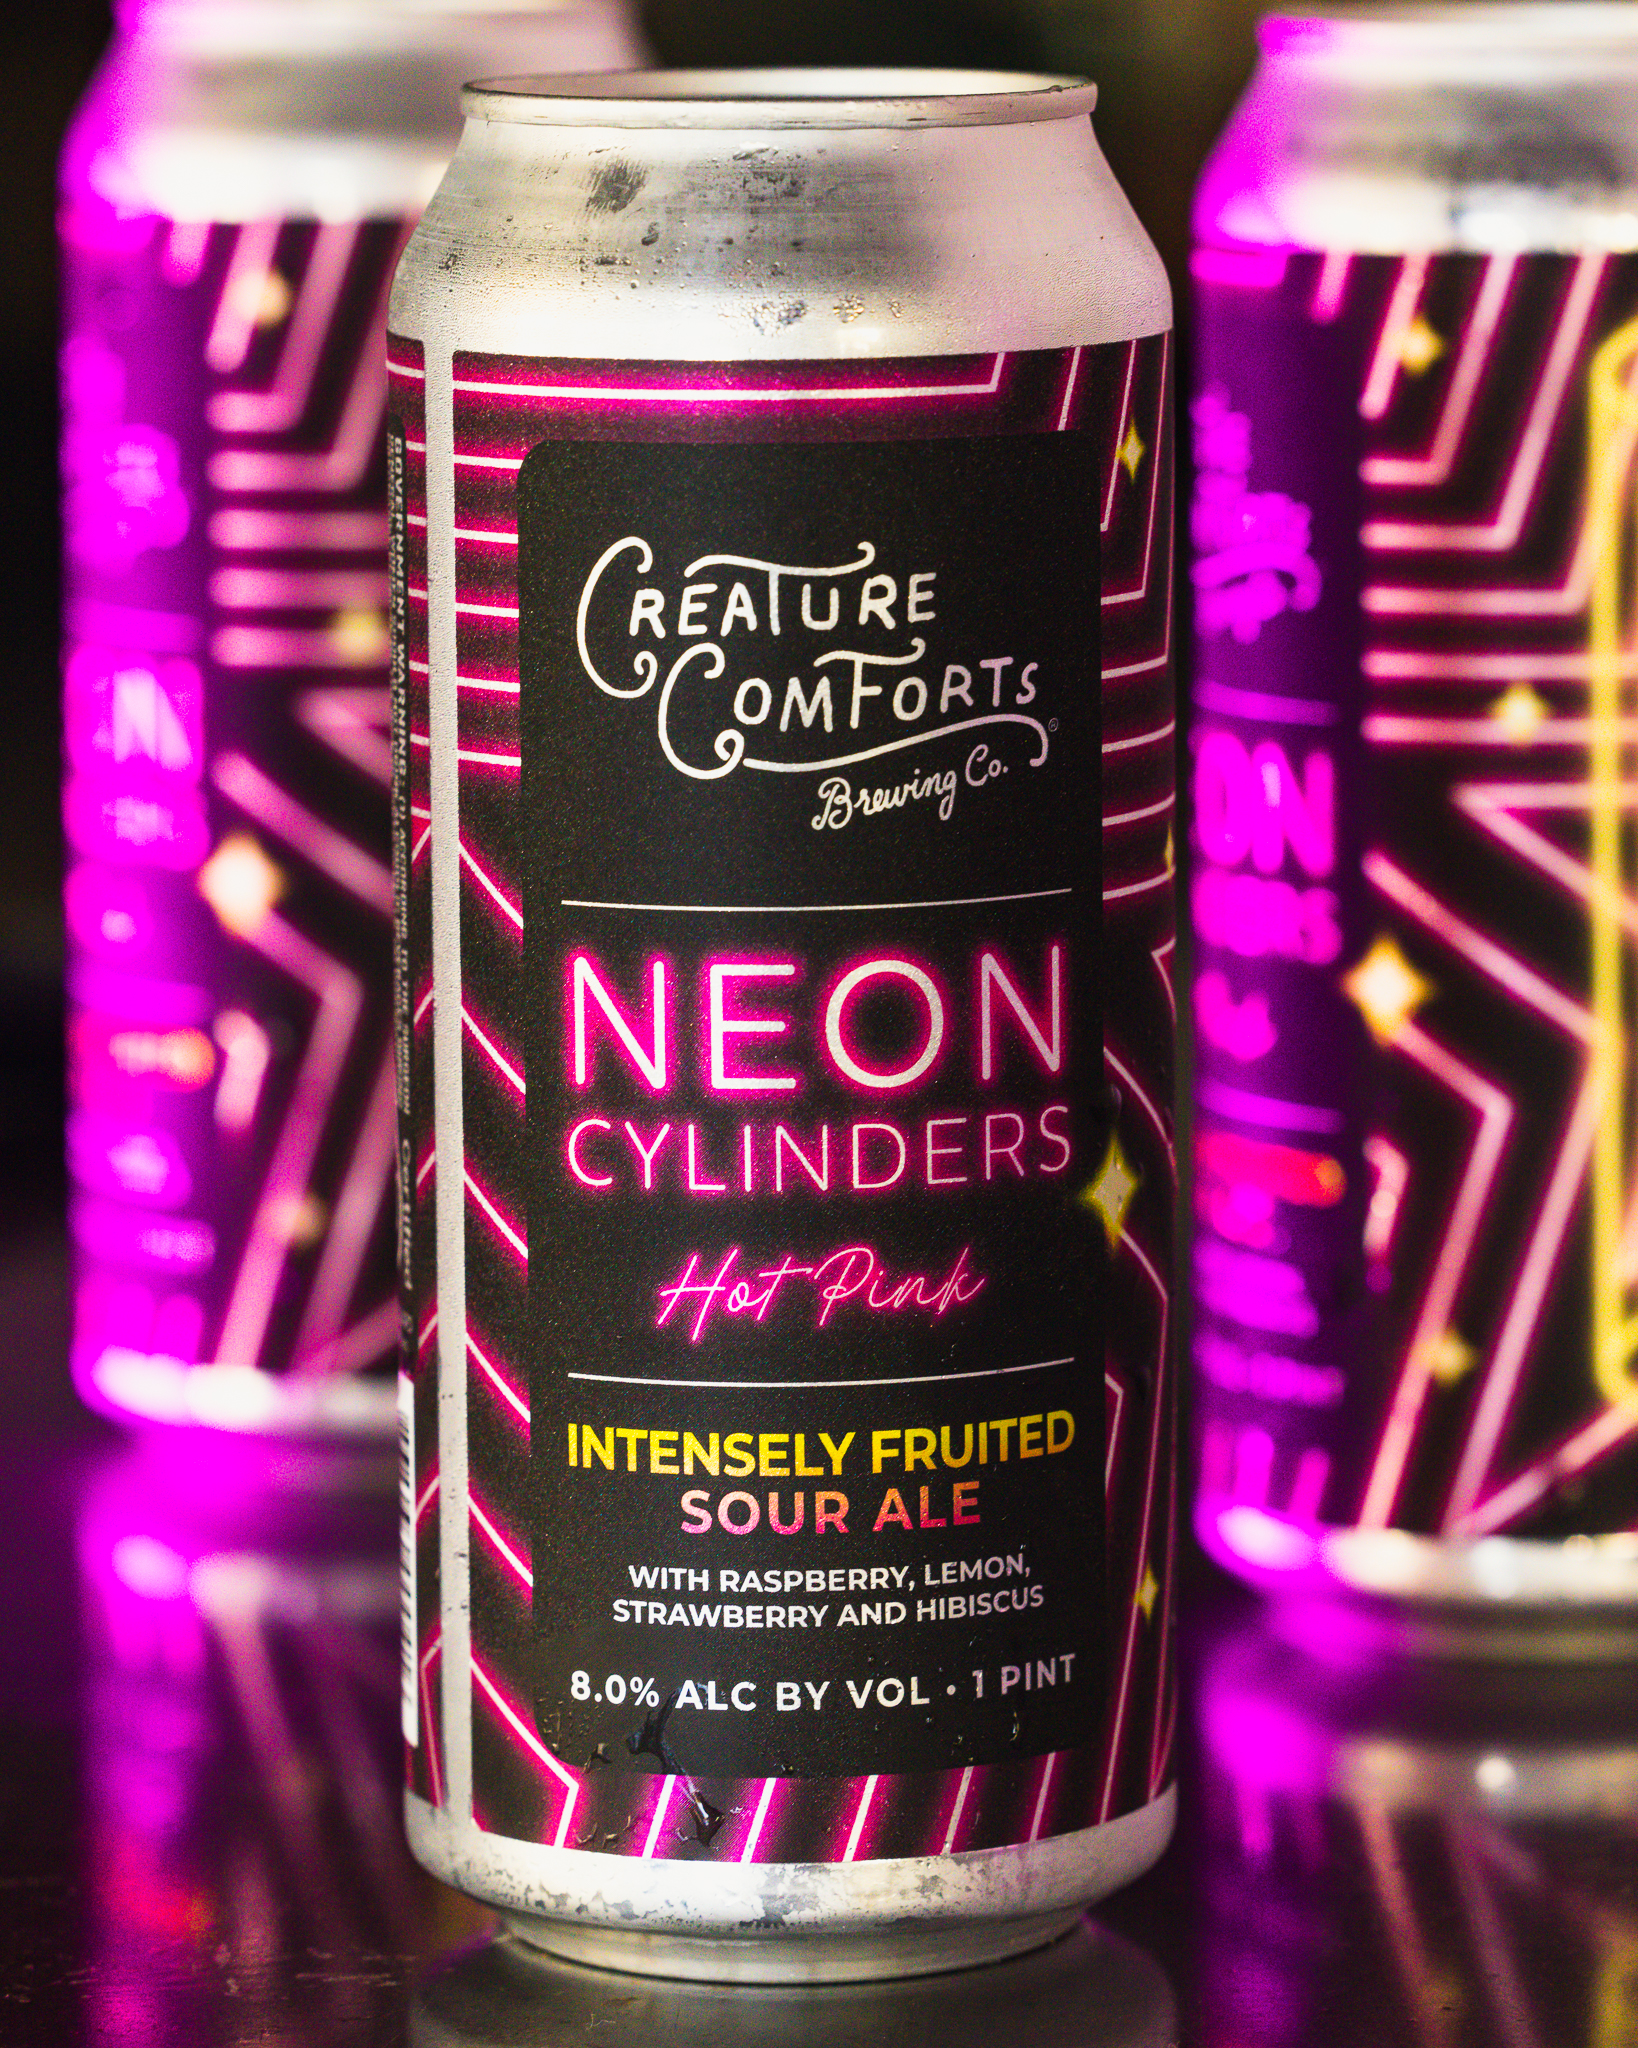 Neon Cylinders: Hot Pink